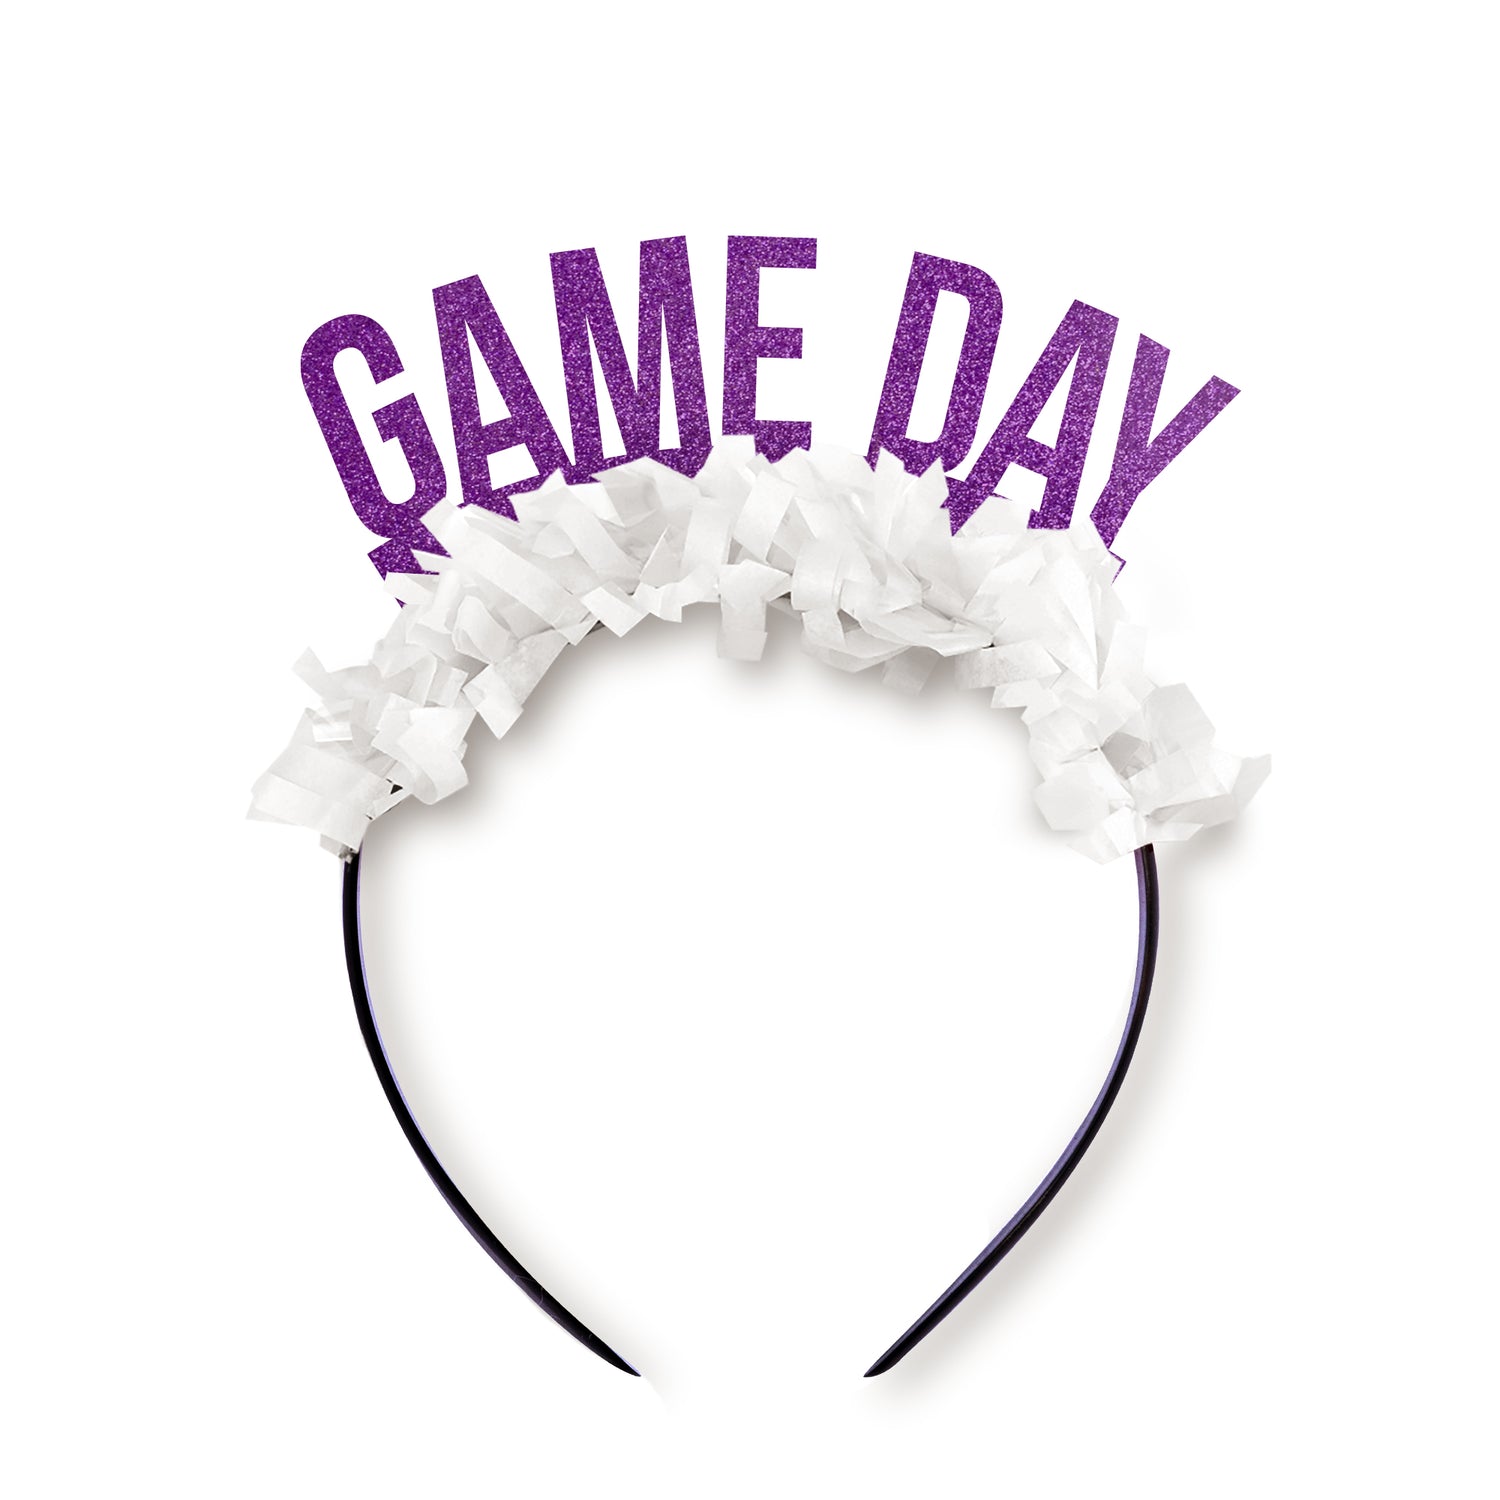 Texas Football Party Fangear for women - Texas "Game Day" Party Headband. Purple and White Game Day Party Headband